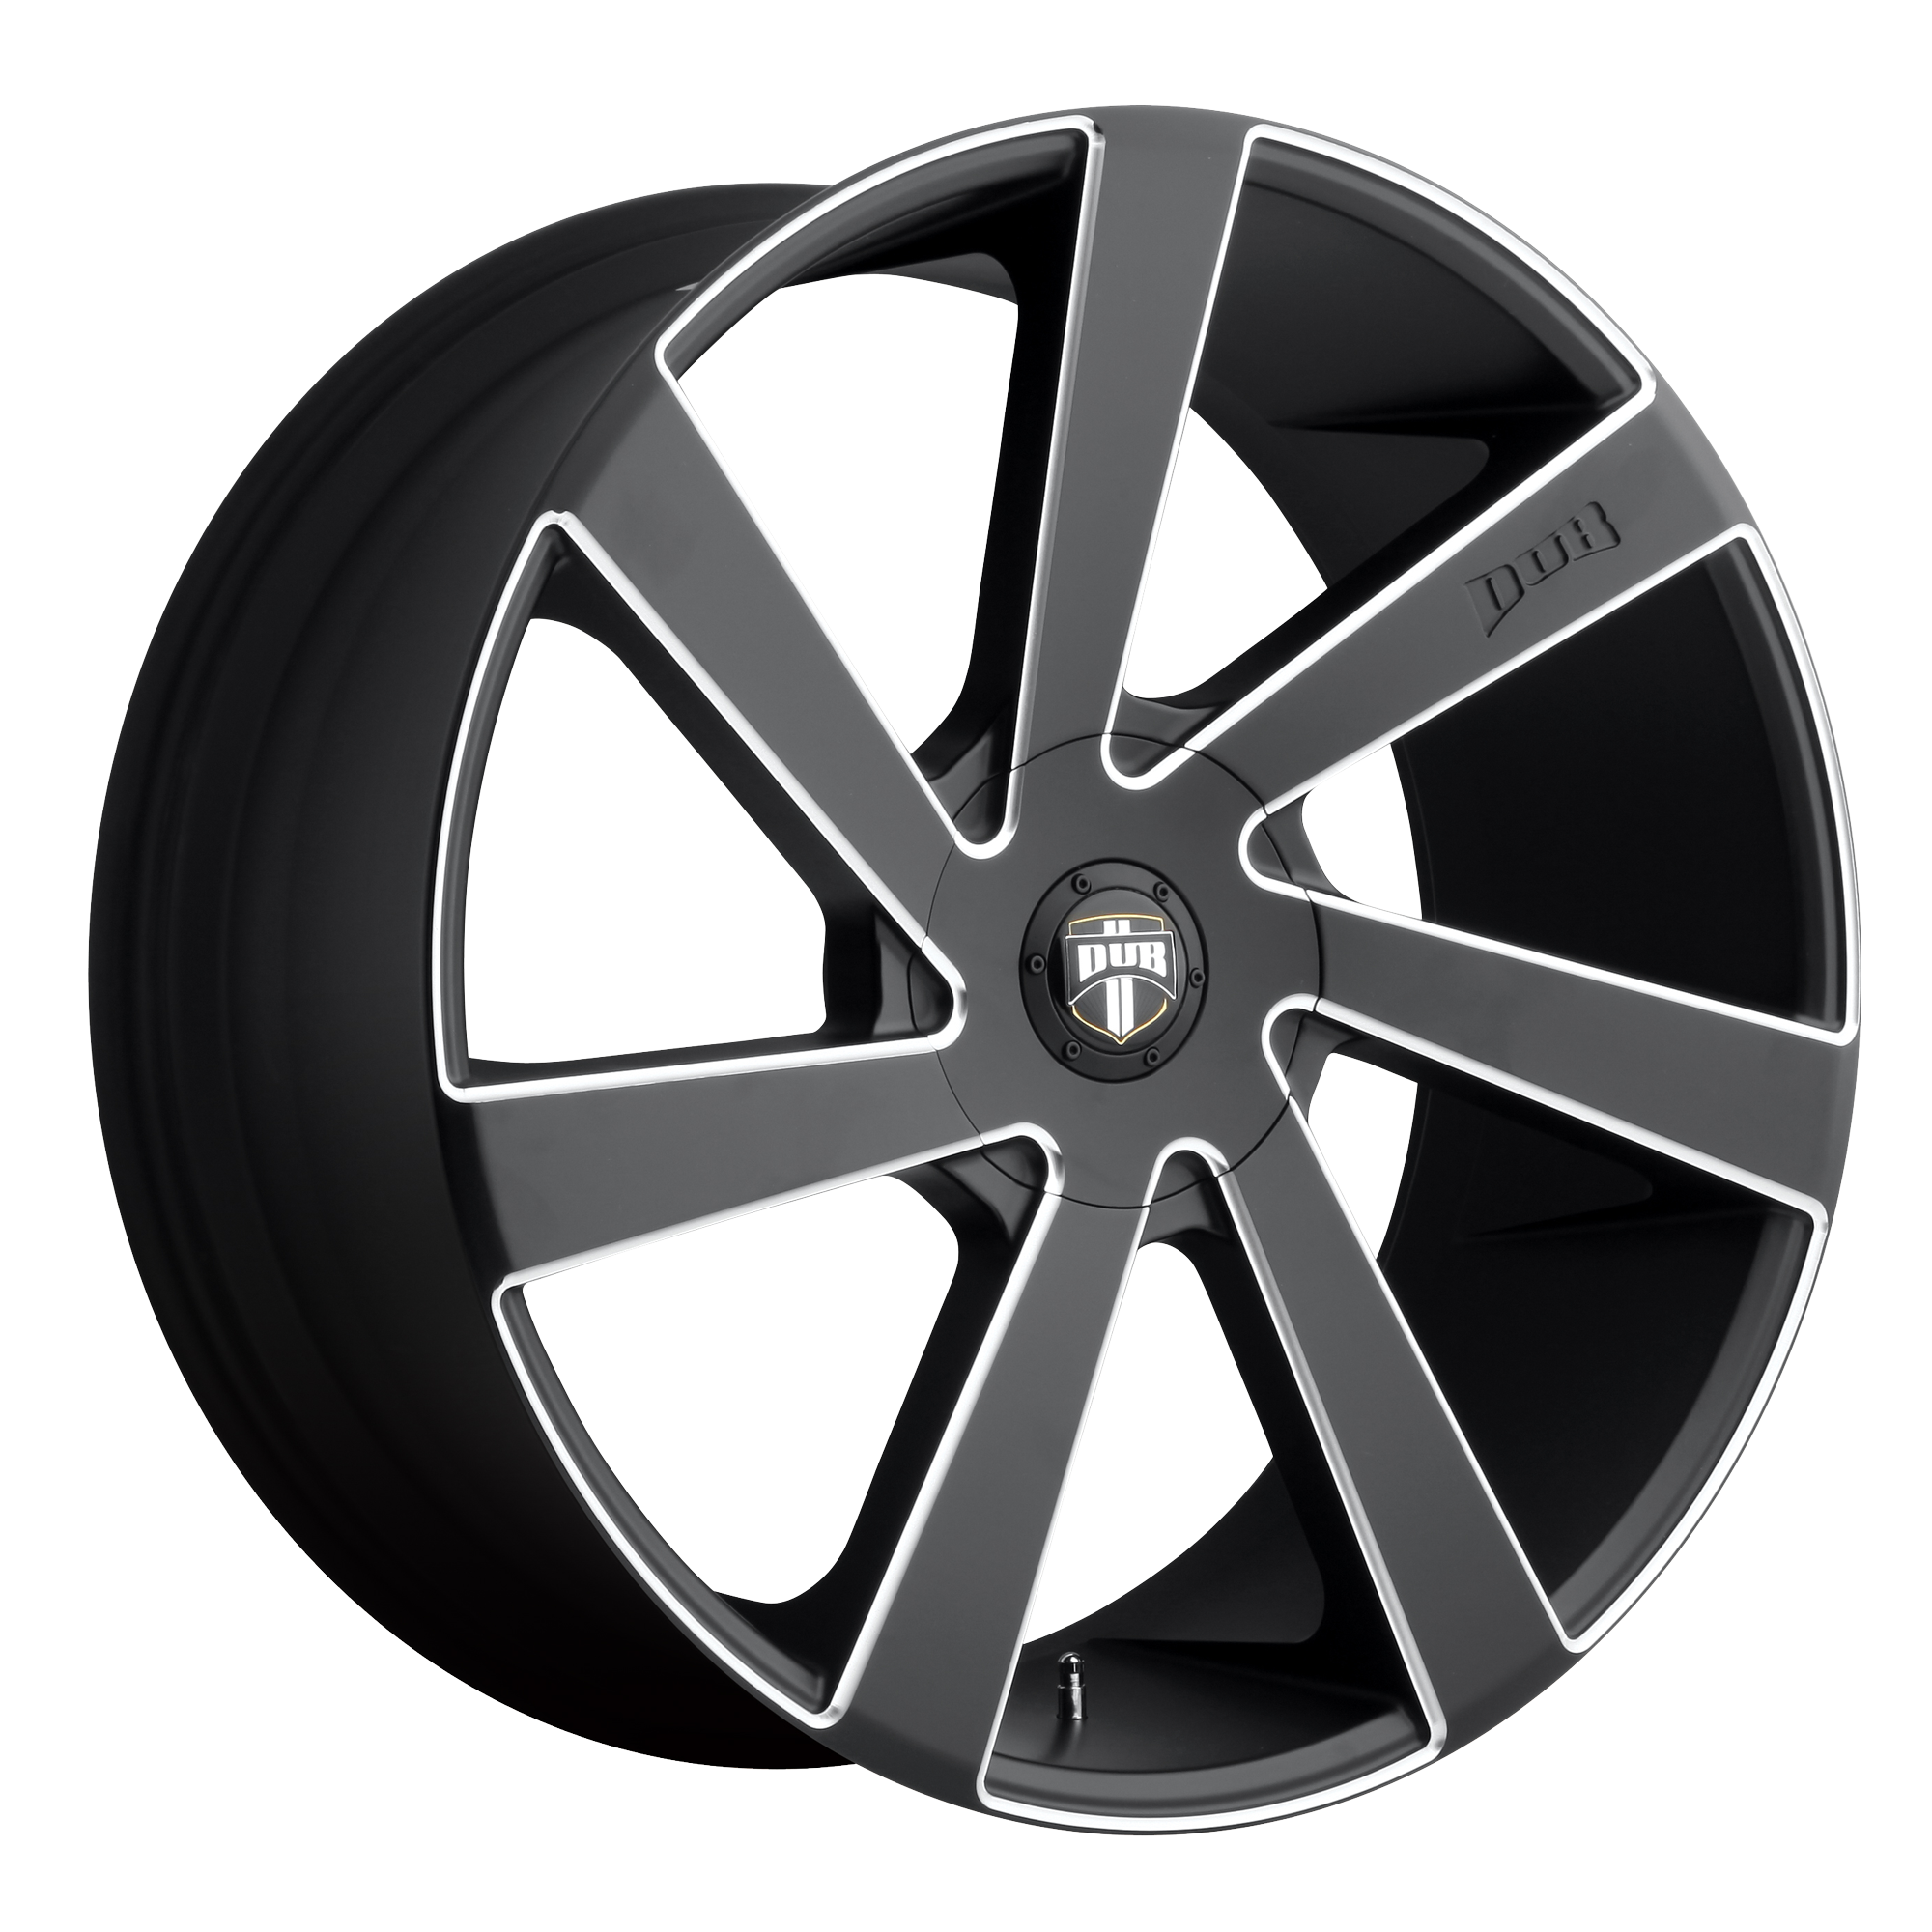 DIRECTA 24x10 5x115.00/5x120.65 MATTE BLACK MILLED (15 mm) - Tires and Engine Performance